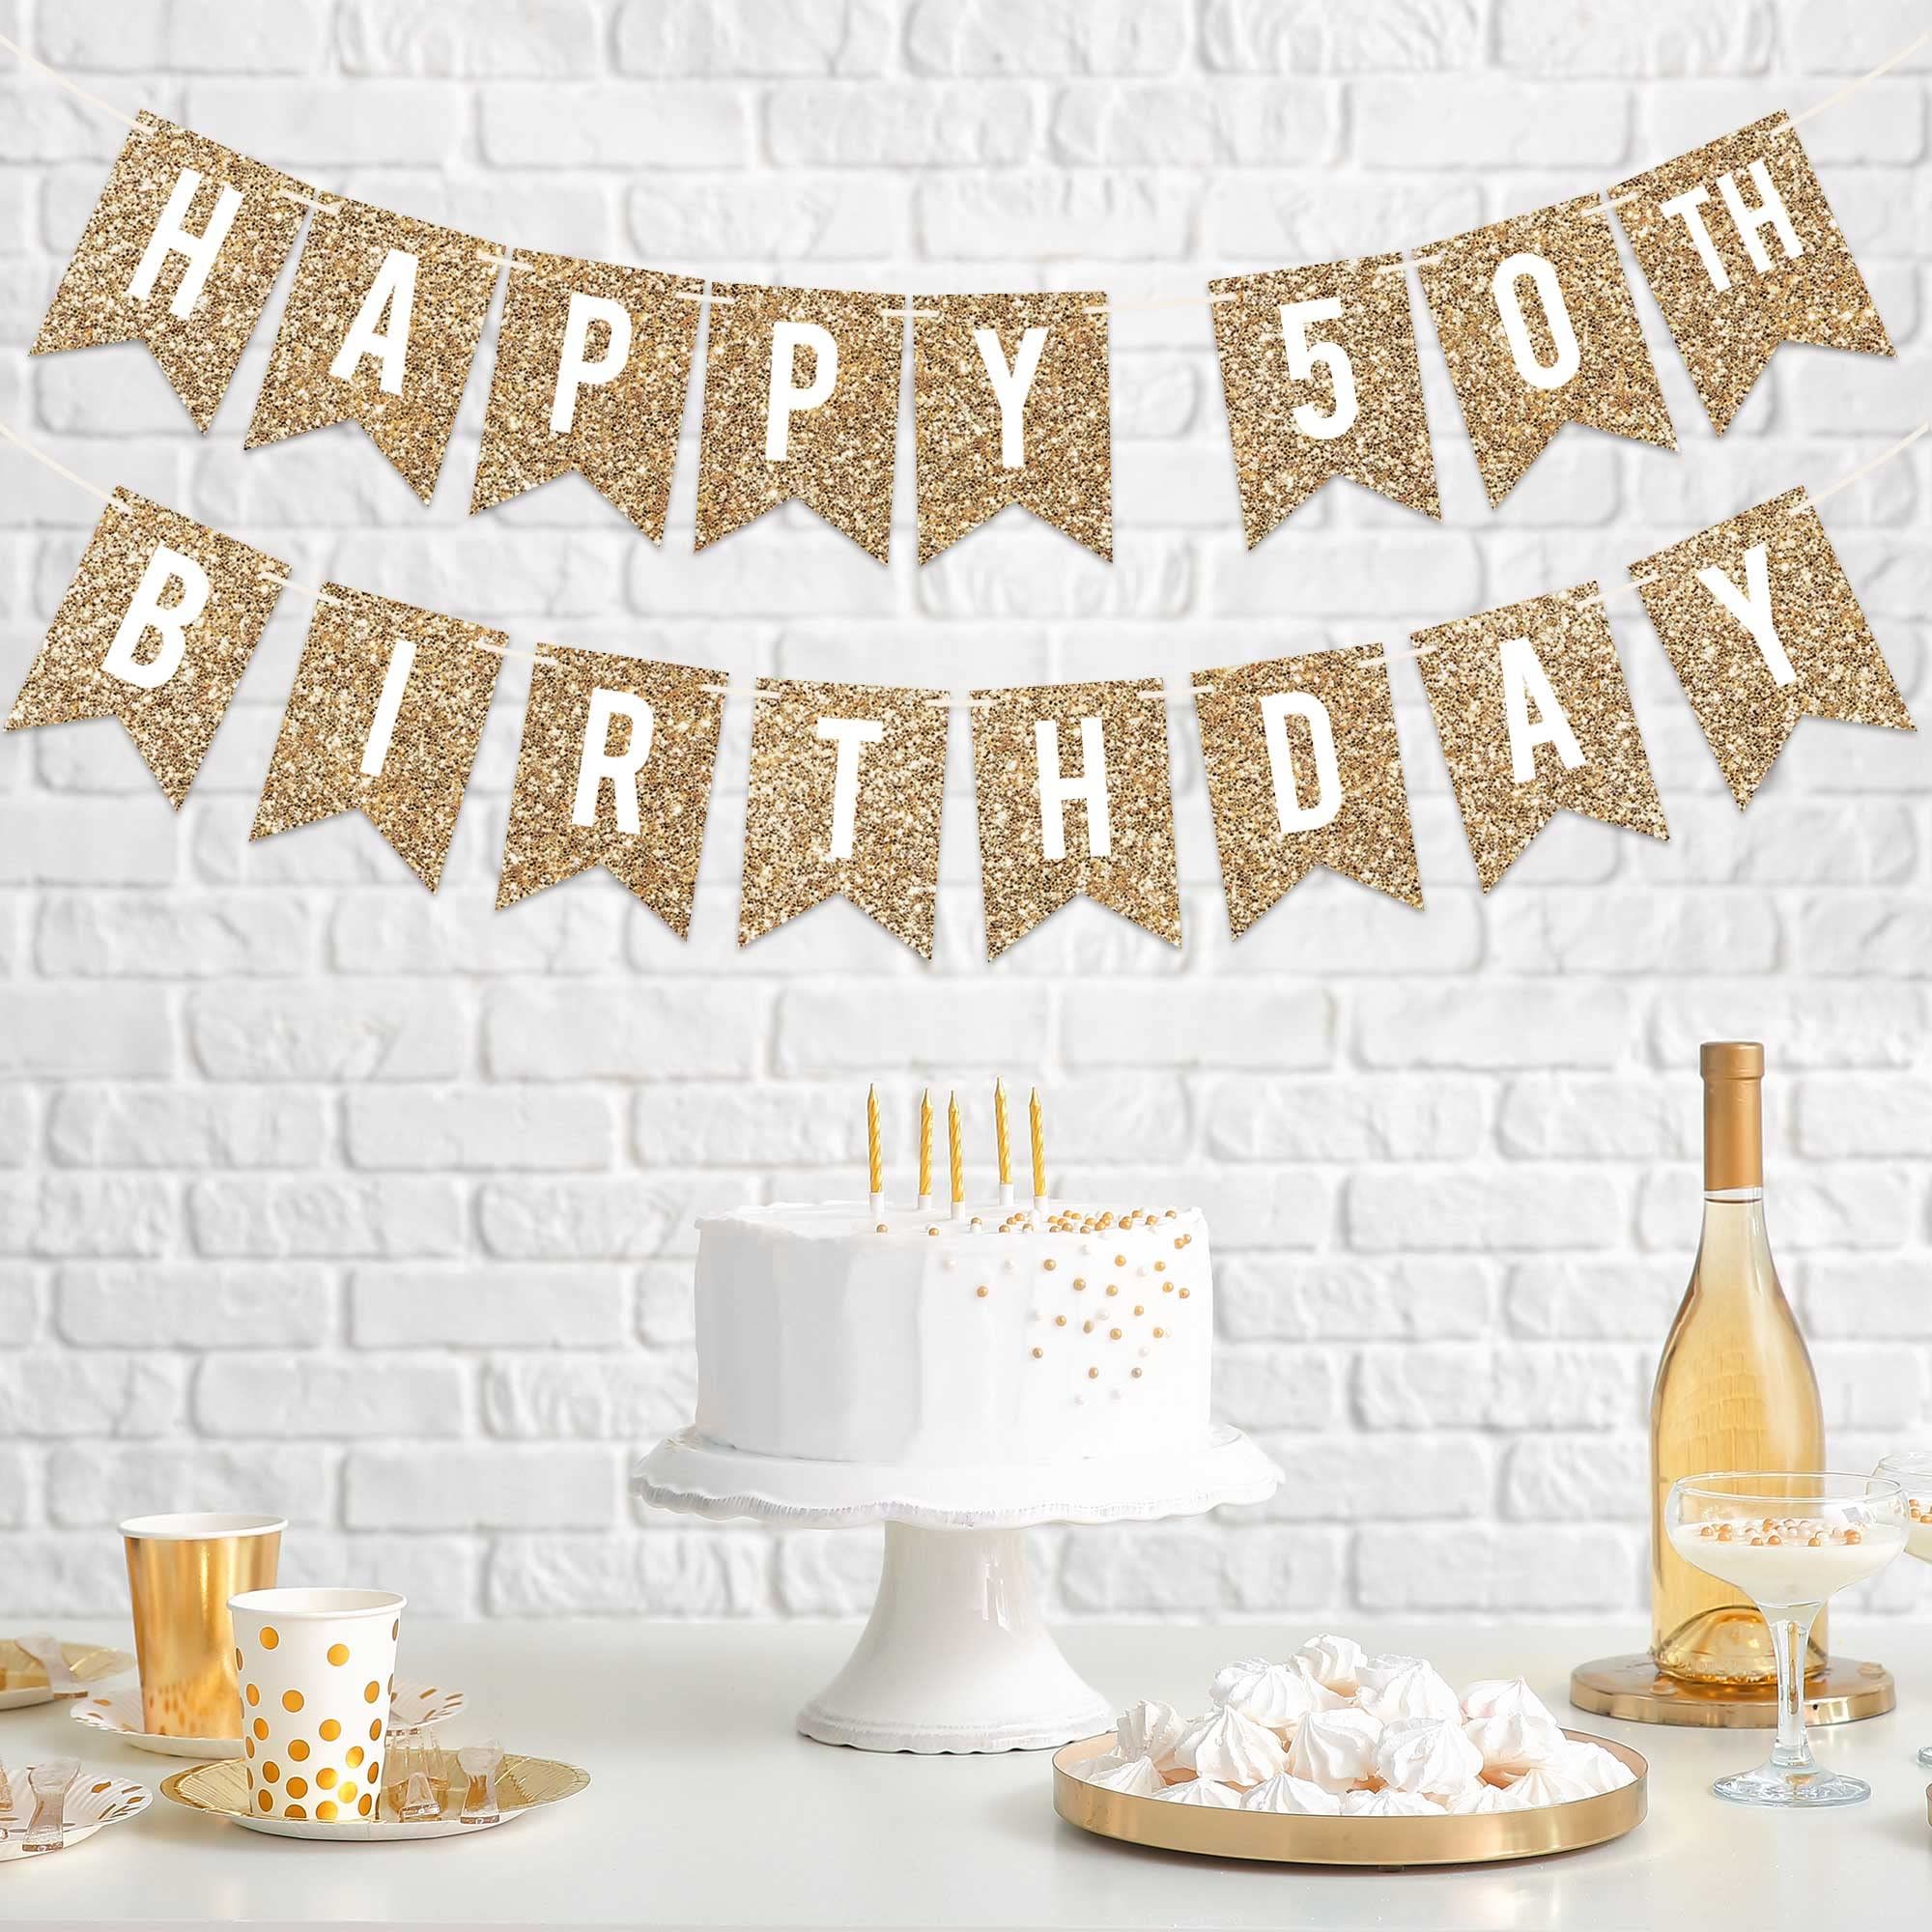 <p><strong>$11.99</strong></p><p>Keep it simple yet festive with a glittery Happy 50th Birthday banner. Take a cue from the gold color and source matching cups and plates for a truly golden celebration.</p>